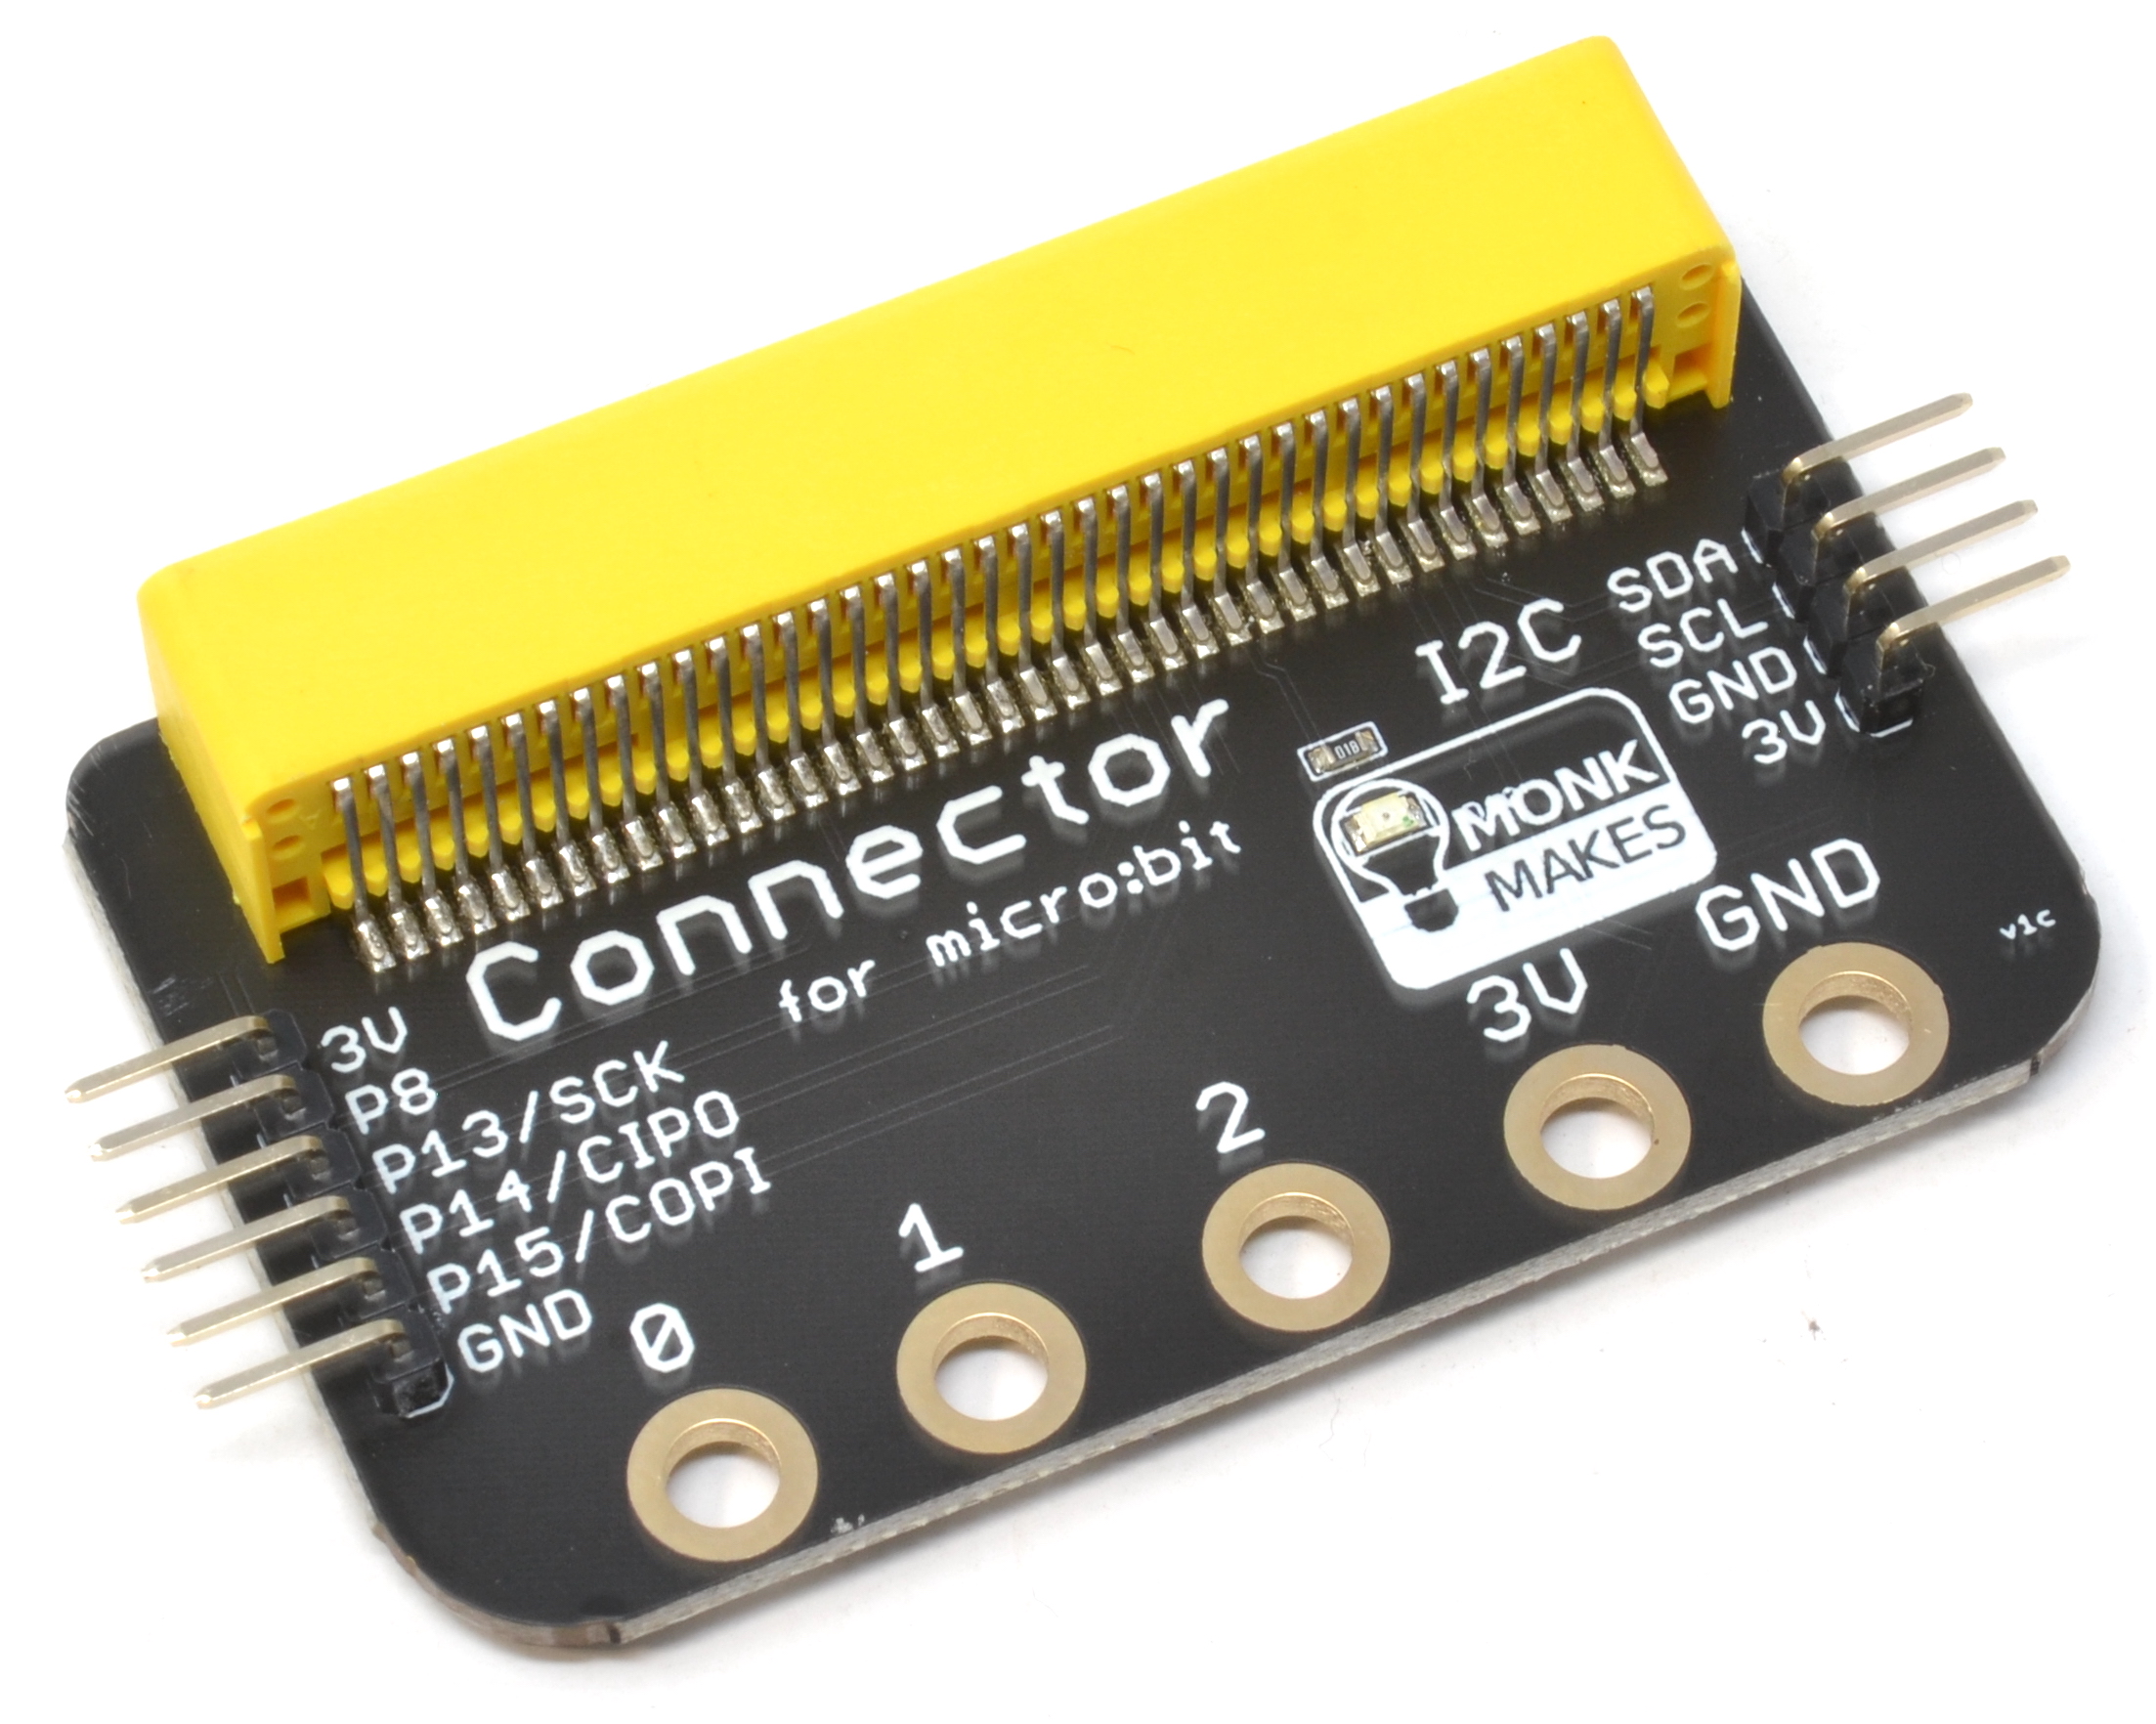 Connector for micro:bit